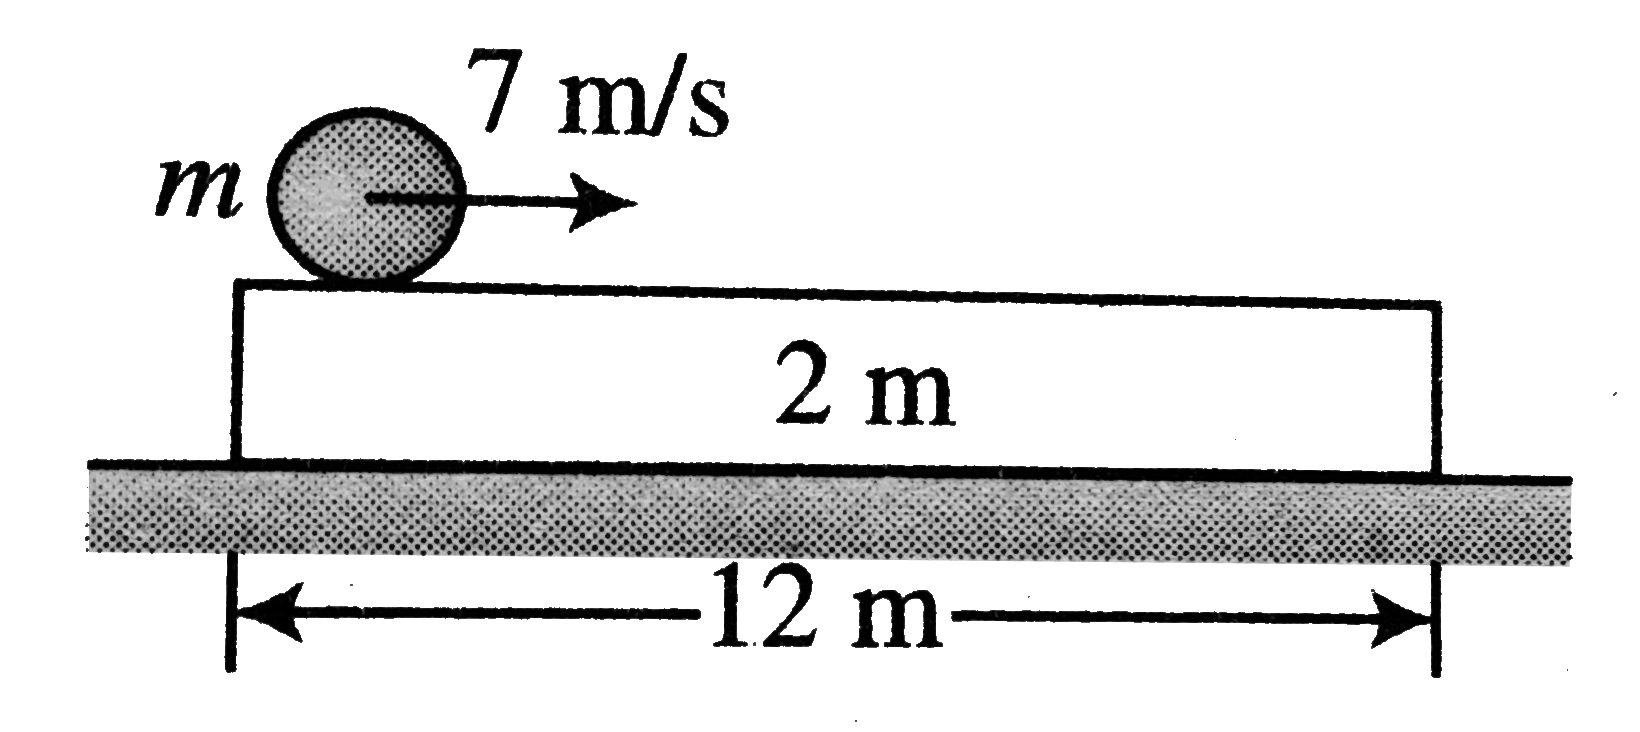 A cylinder of mass m is kept on the edge of a plank of mass 2m and length 12 m, which in turn is kept on smooth ground. Coefficient of friction between the plank and the cylinder is 0.1. The cylinder is given an impulse, which imparts it a velocity 7 ms^(-1) but no angular velocity. Find the time after which the cylinder falls off the plank.